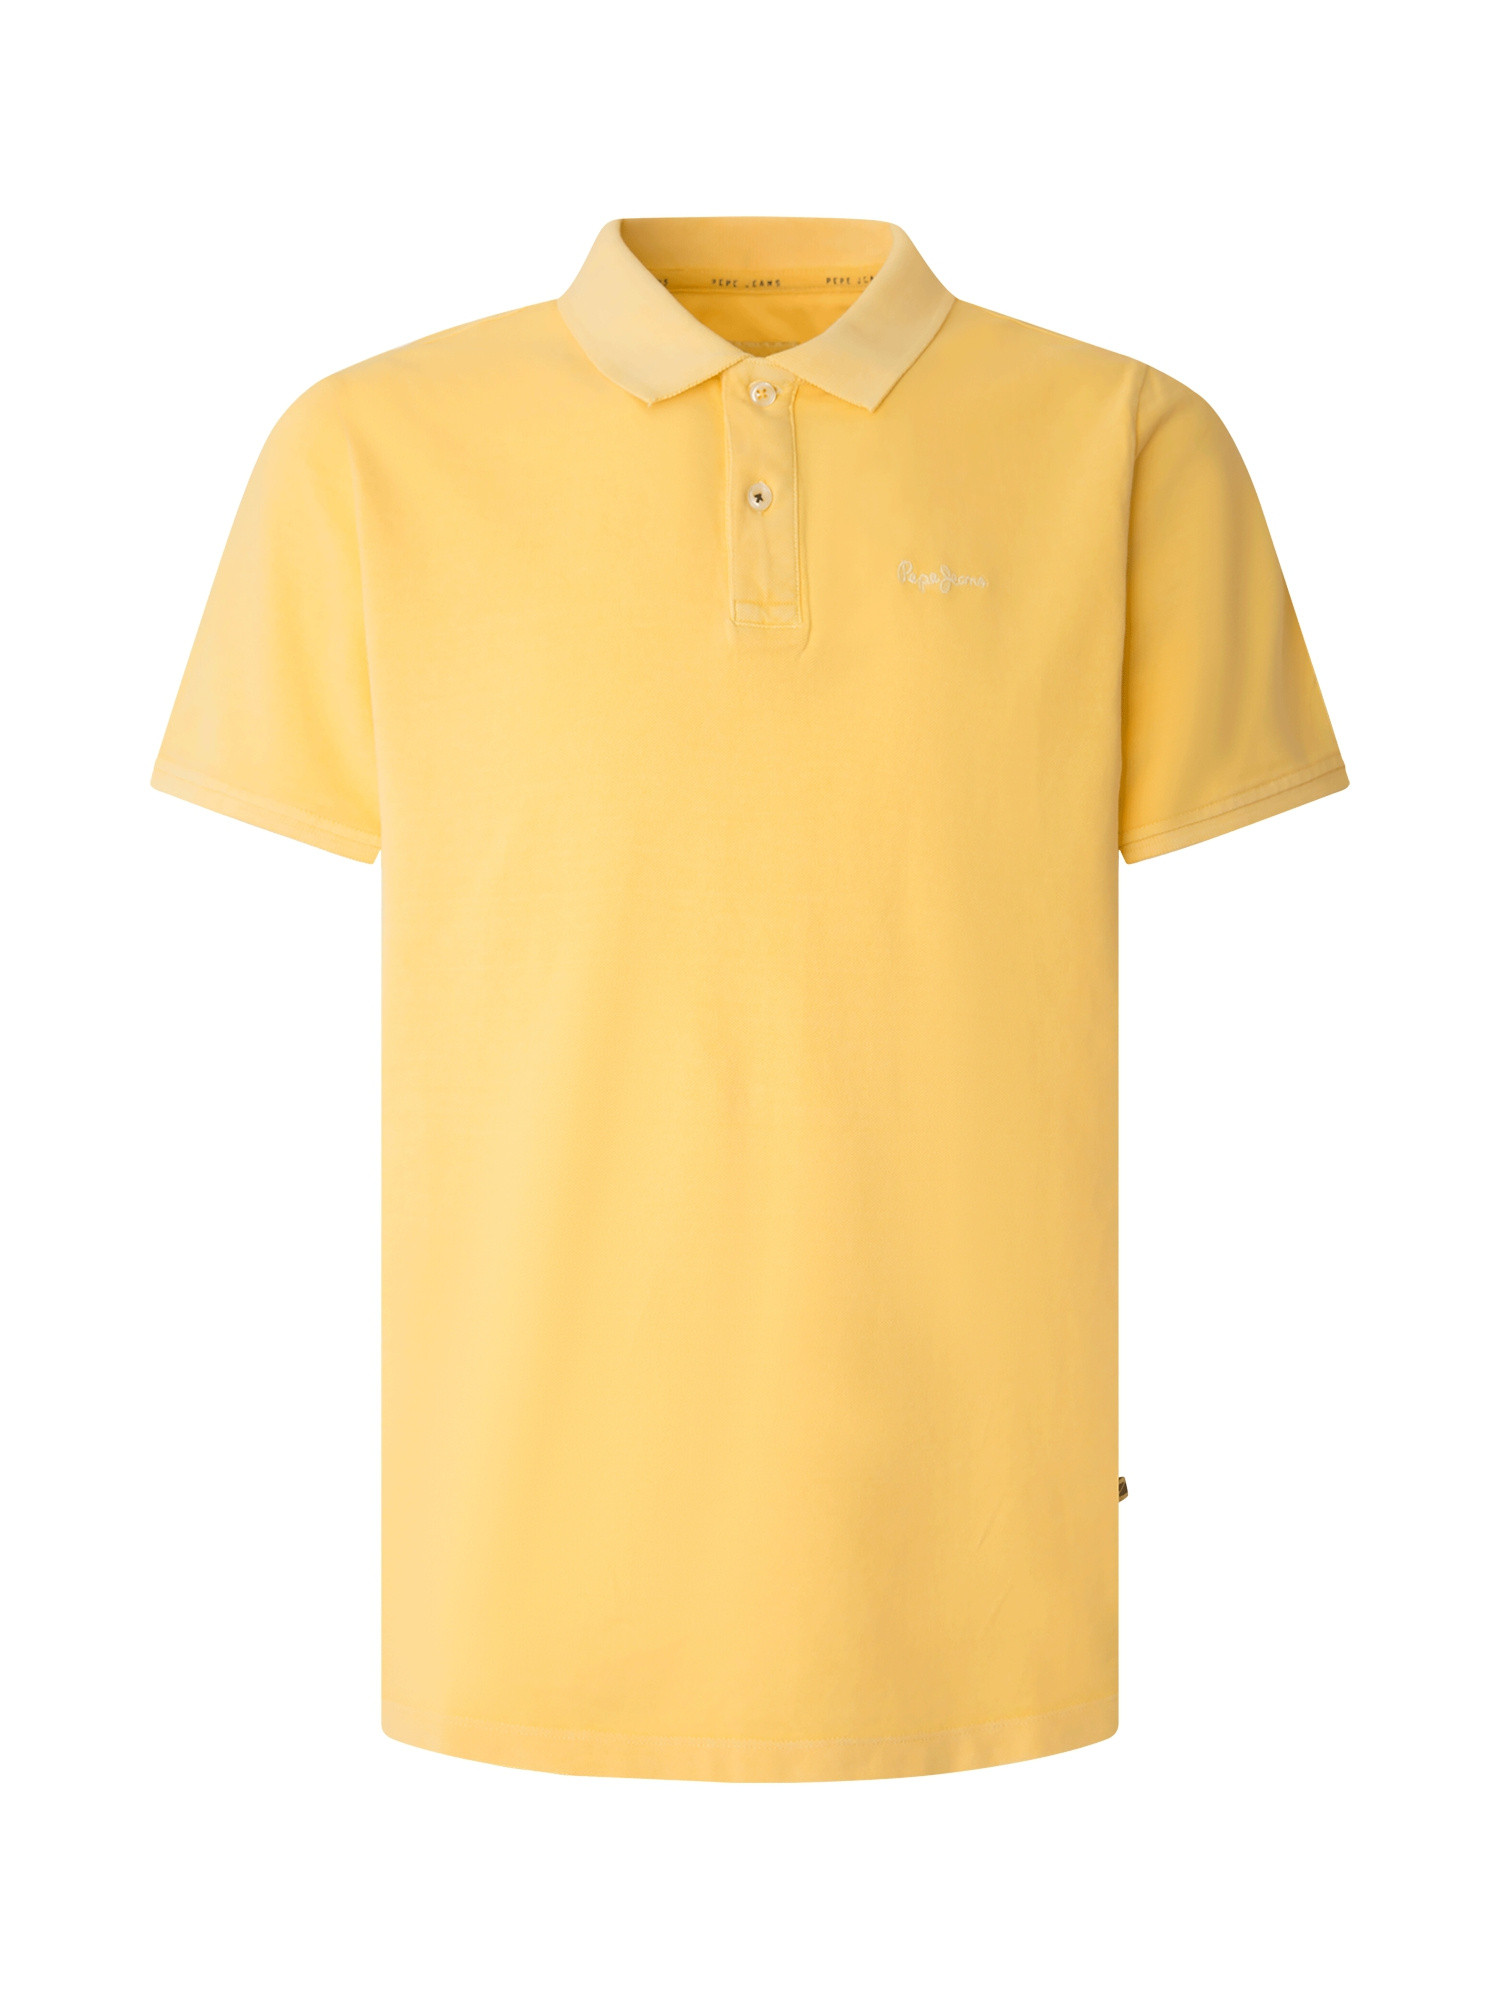 Pepe Jeans - Cotton polo shirt with logo, Sunflower Yellow, large image number 0